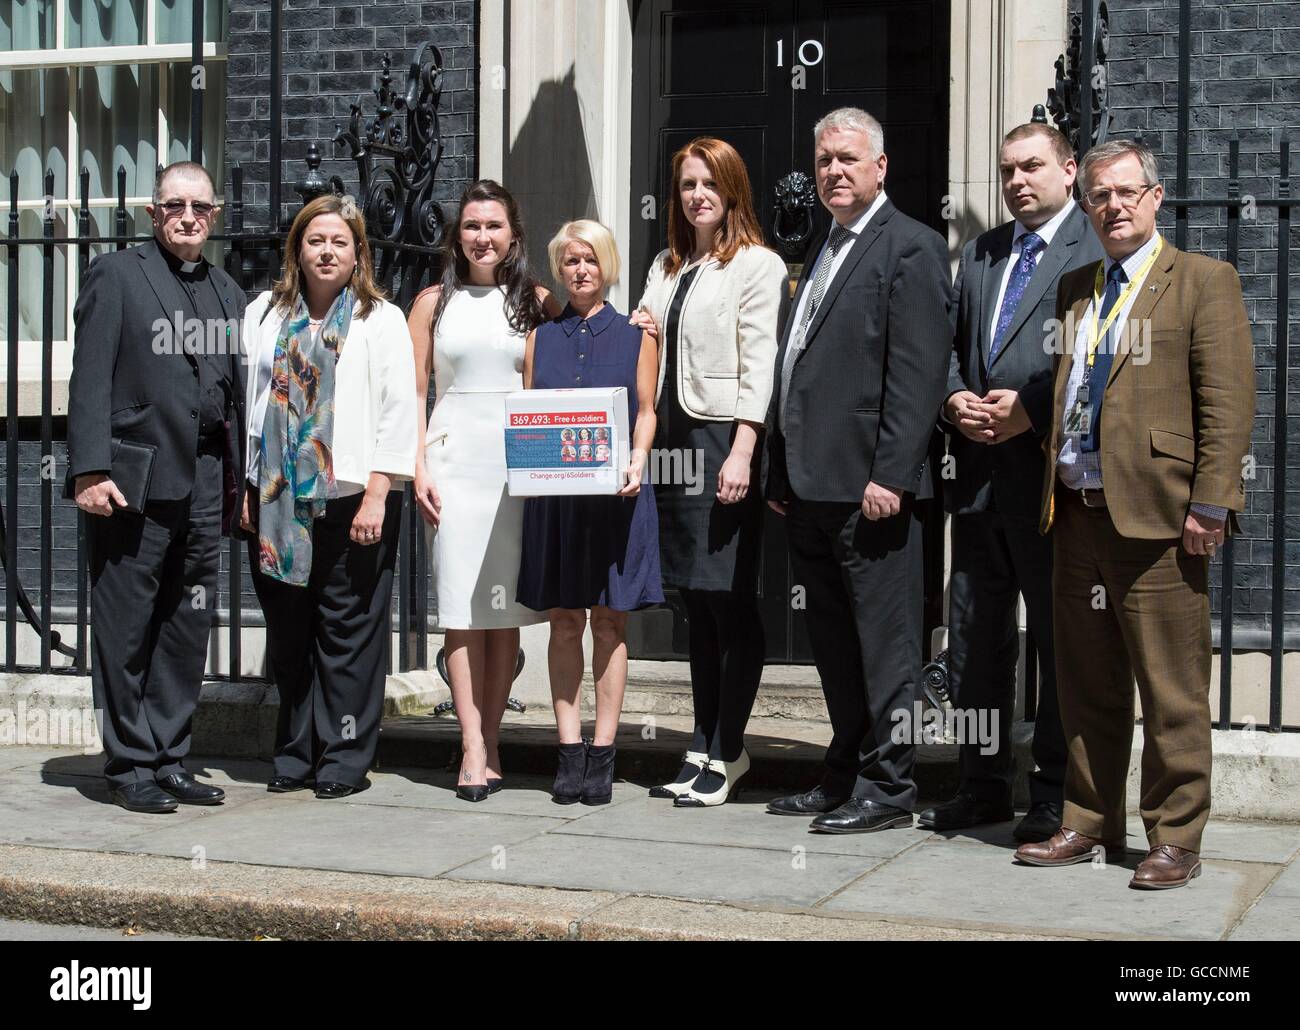 (Left to right) The Revd Canon Ken Peters, Kirsten Oswald MP, Yvonne MacHugh, Lisa Dunn, Joanne Thomlinson, Ian Lavery MP, Jonathan Arnott MEP and Brendan O'Hara MP, present a 350,000 signature petition to Downing Street for the release of several British men who have been held in jail in India for firearms charges for the last 1000 days. Stock Photo